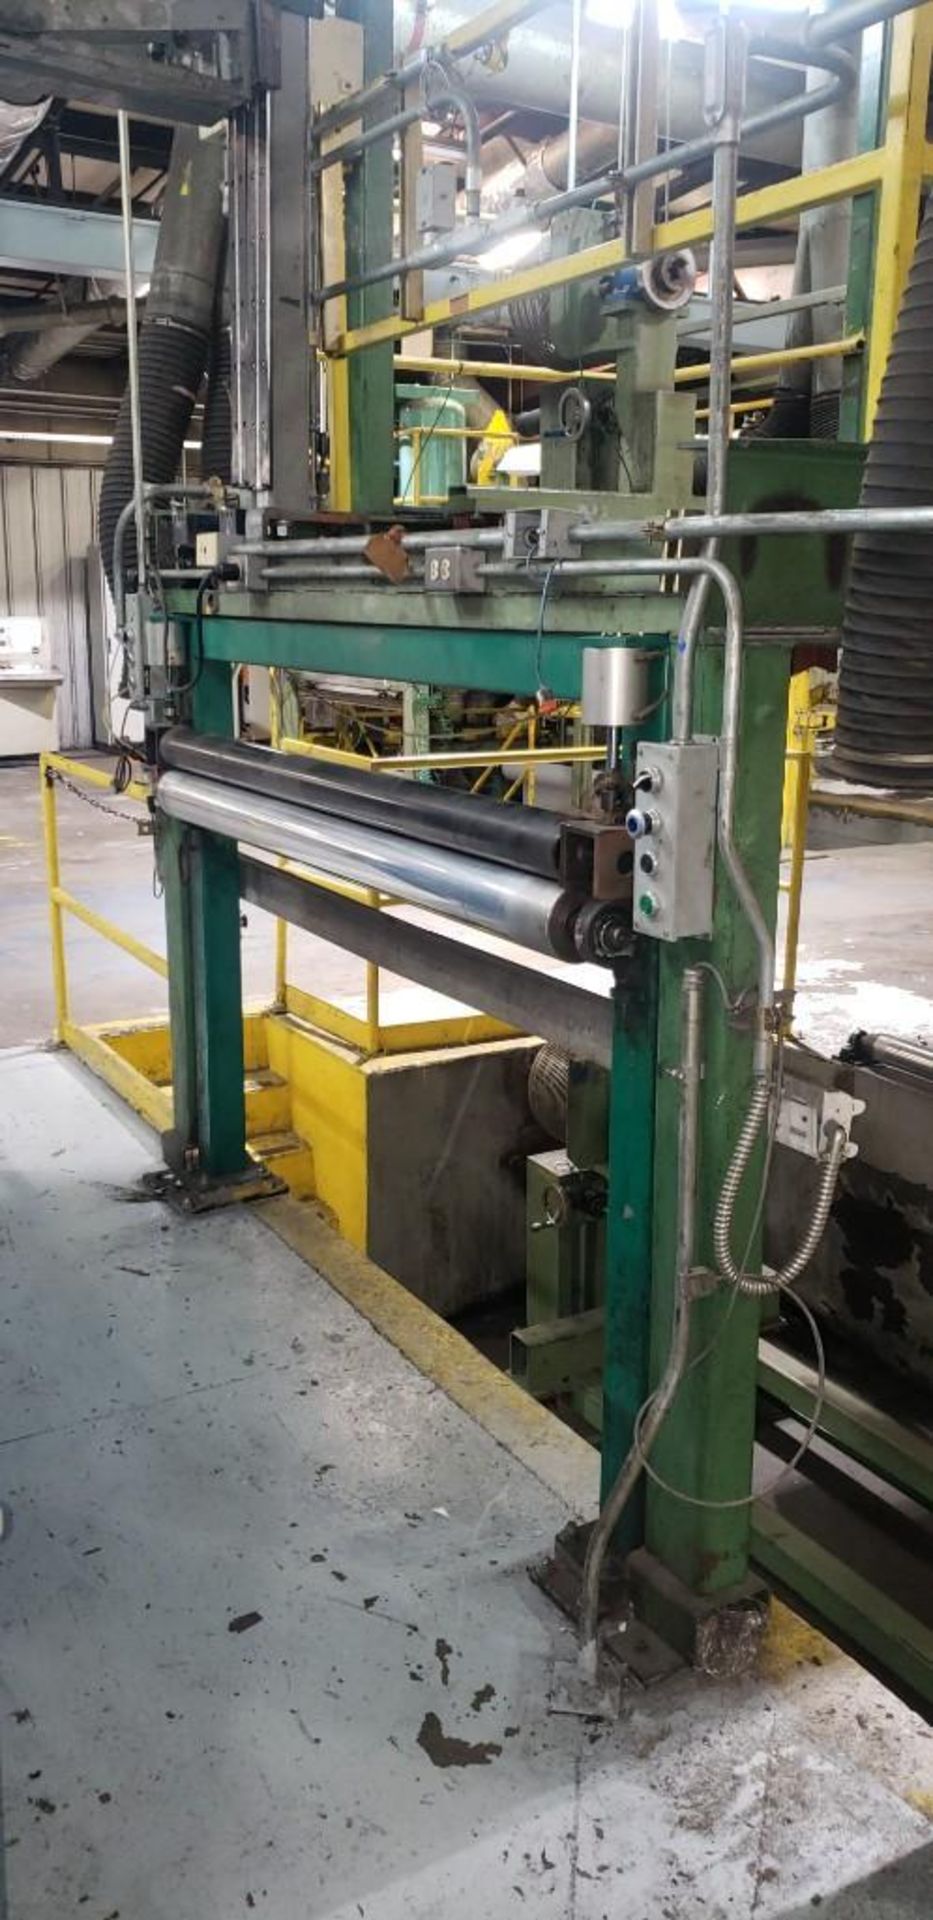 Laminating Line (# 3) Fairview Machine, 24"x70" Hot Oil Heated Two Roll Calendar W/ All Controls - Image 69 of 107